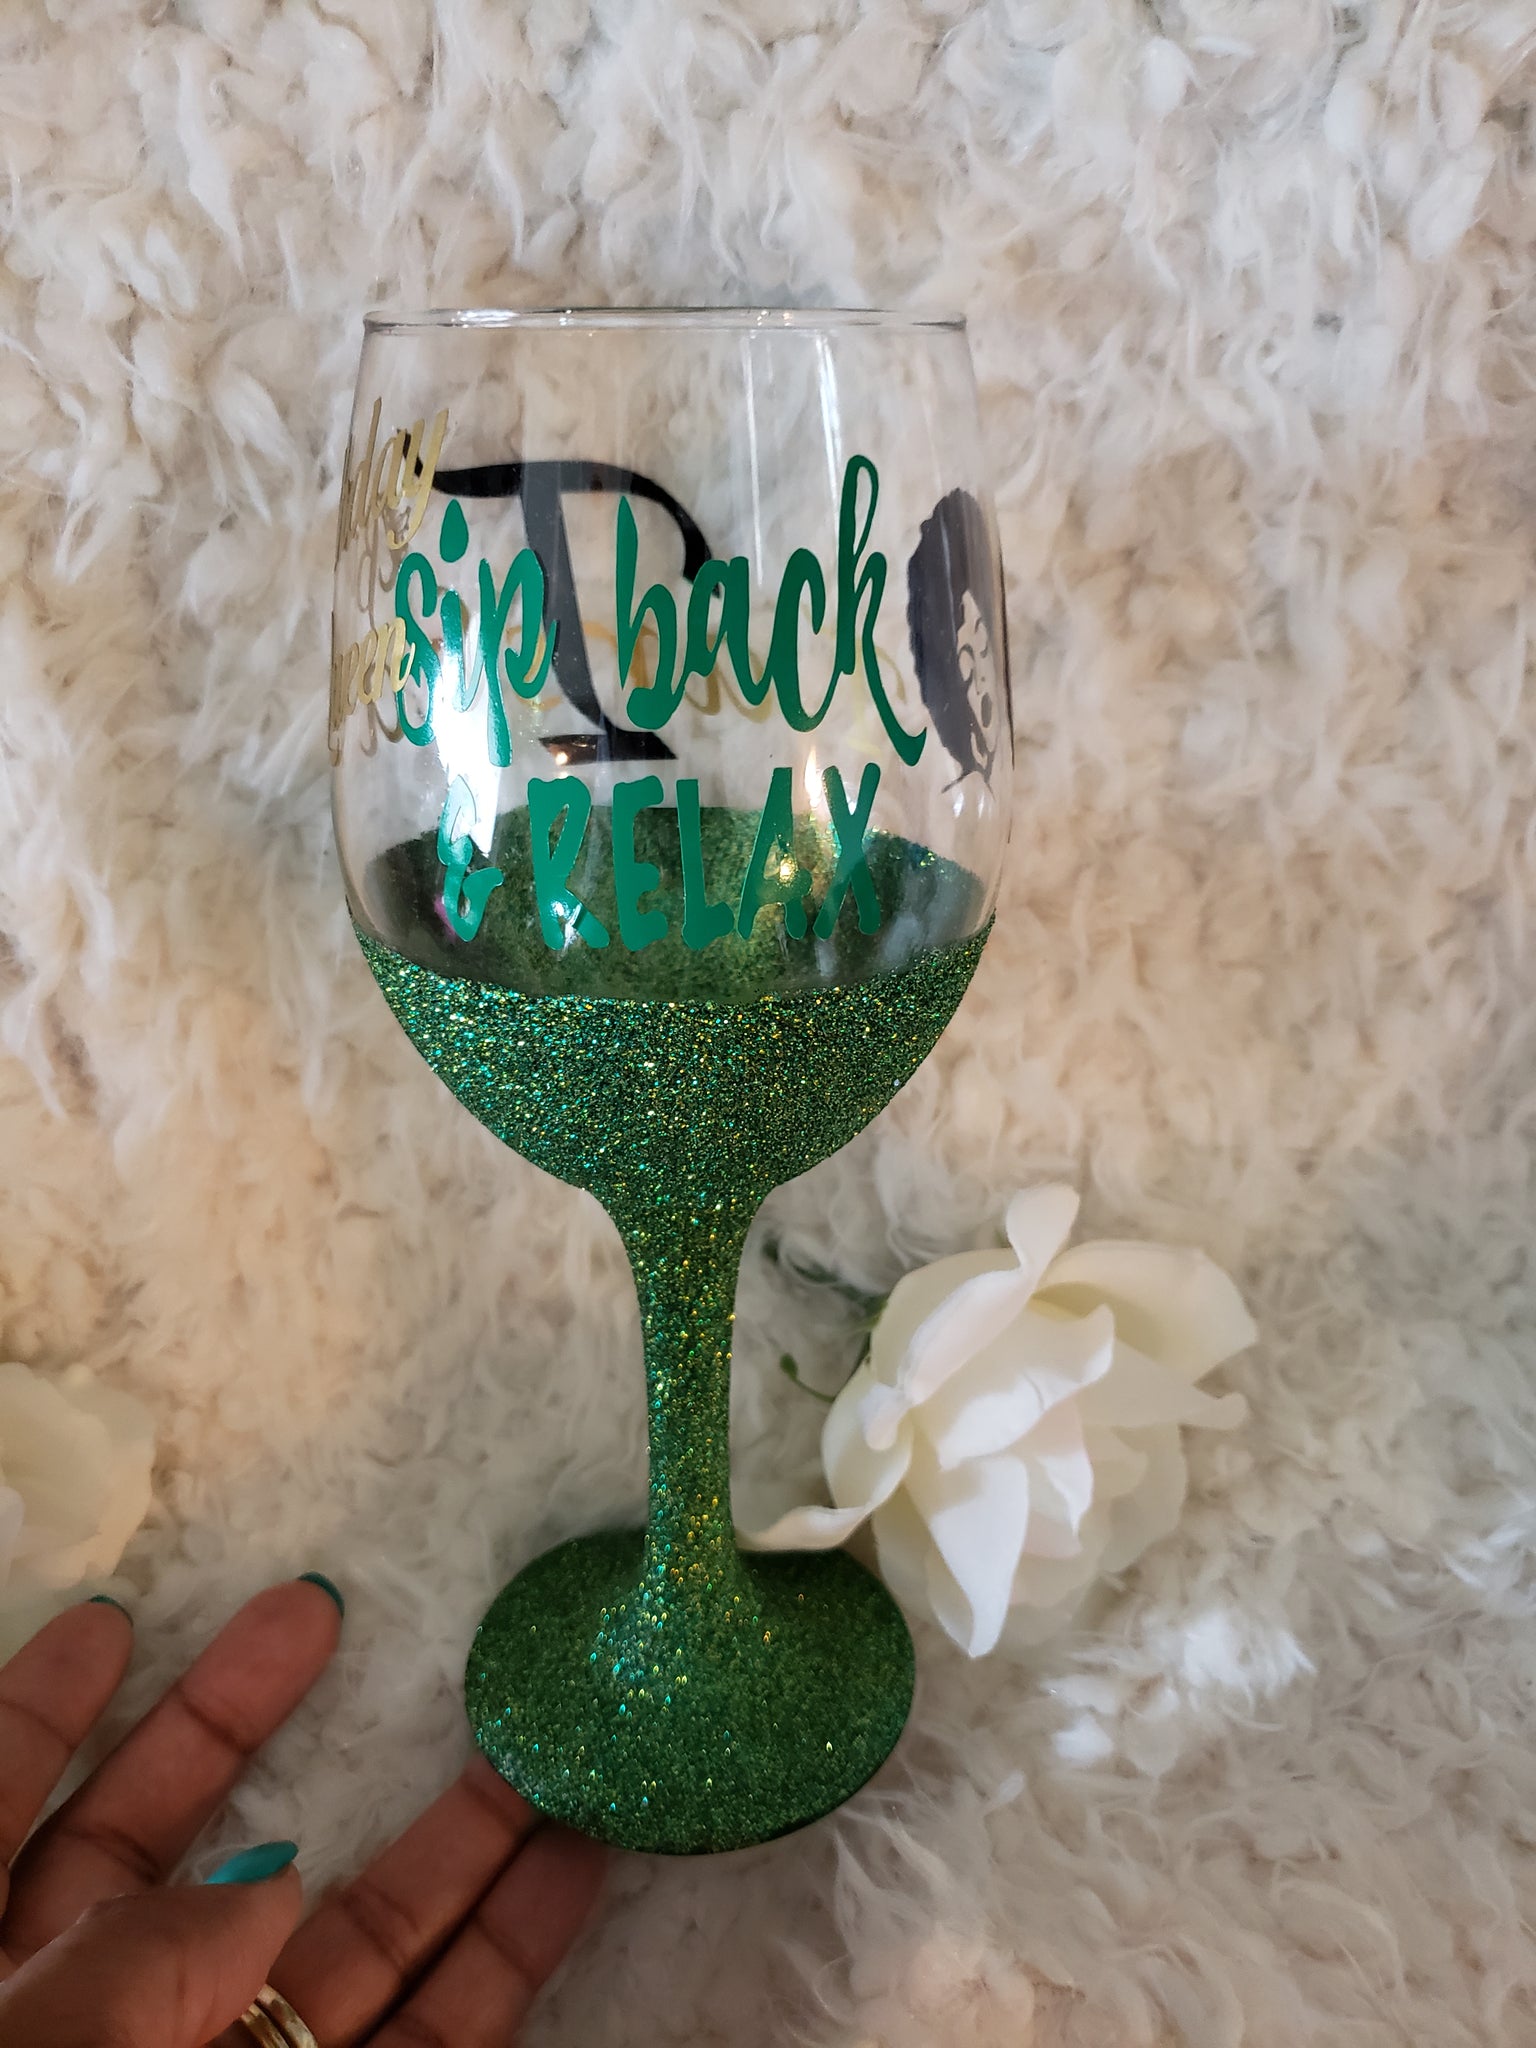 20 oz. Personalized Glitter Wine Sip Back & Relax – Velle Crafts